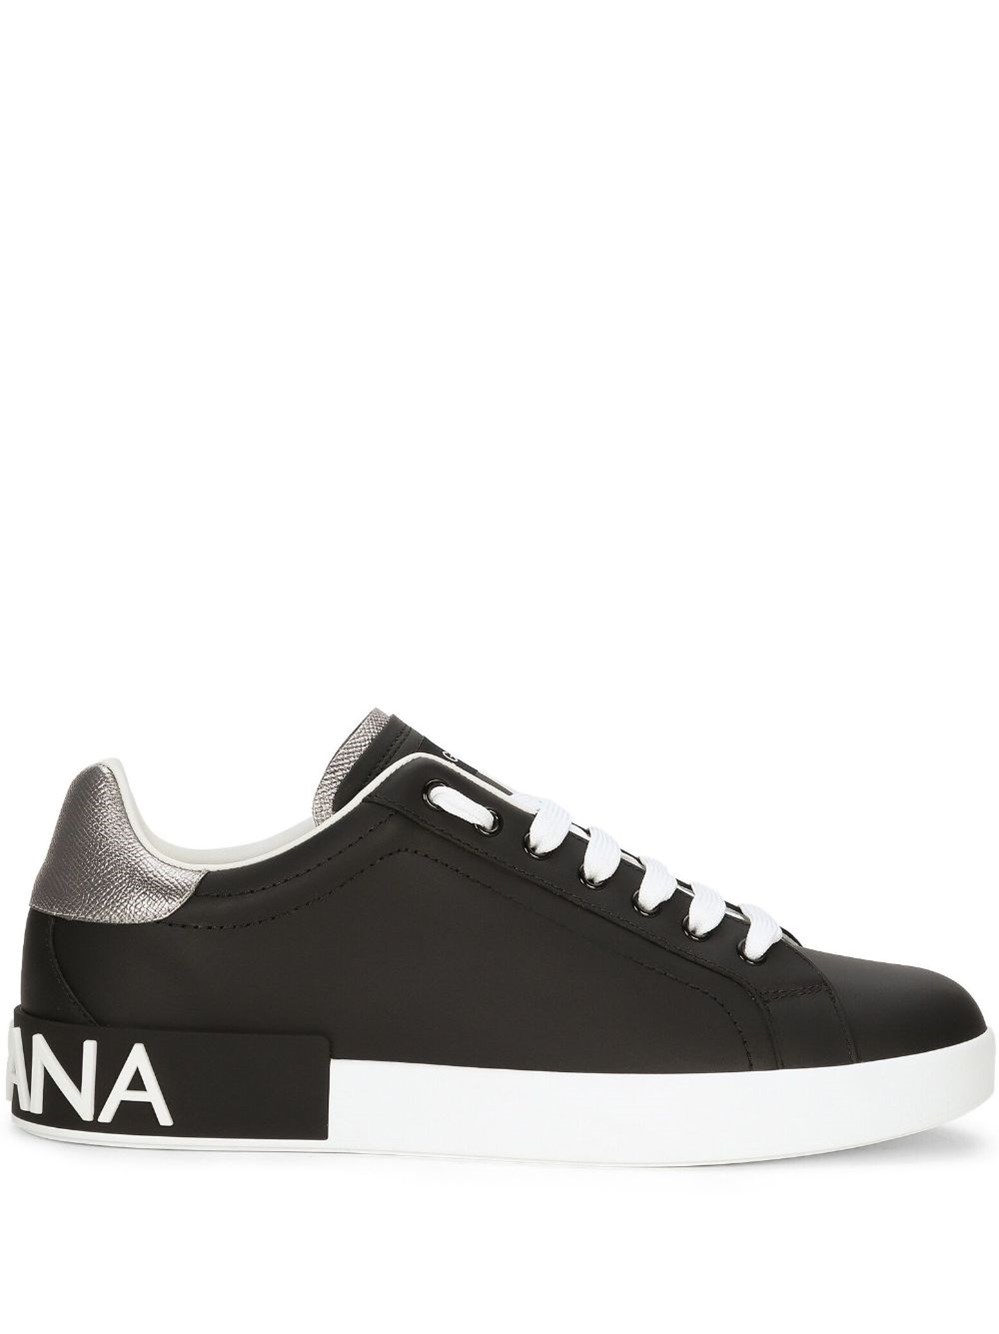 Dolce & Gabbana Logo Insert Leather Trainers In Black  